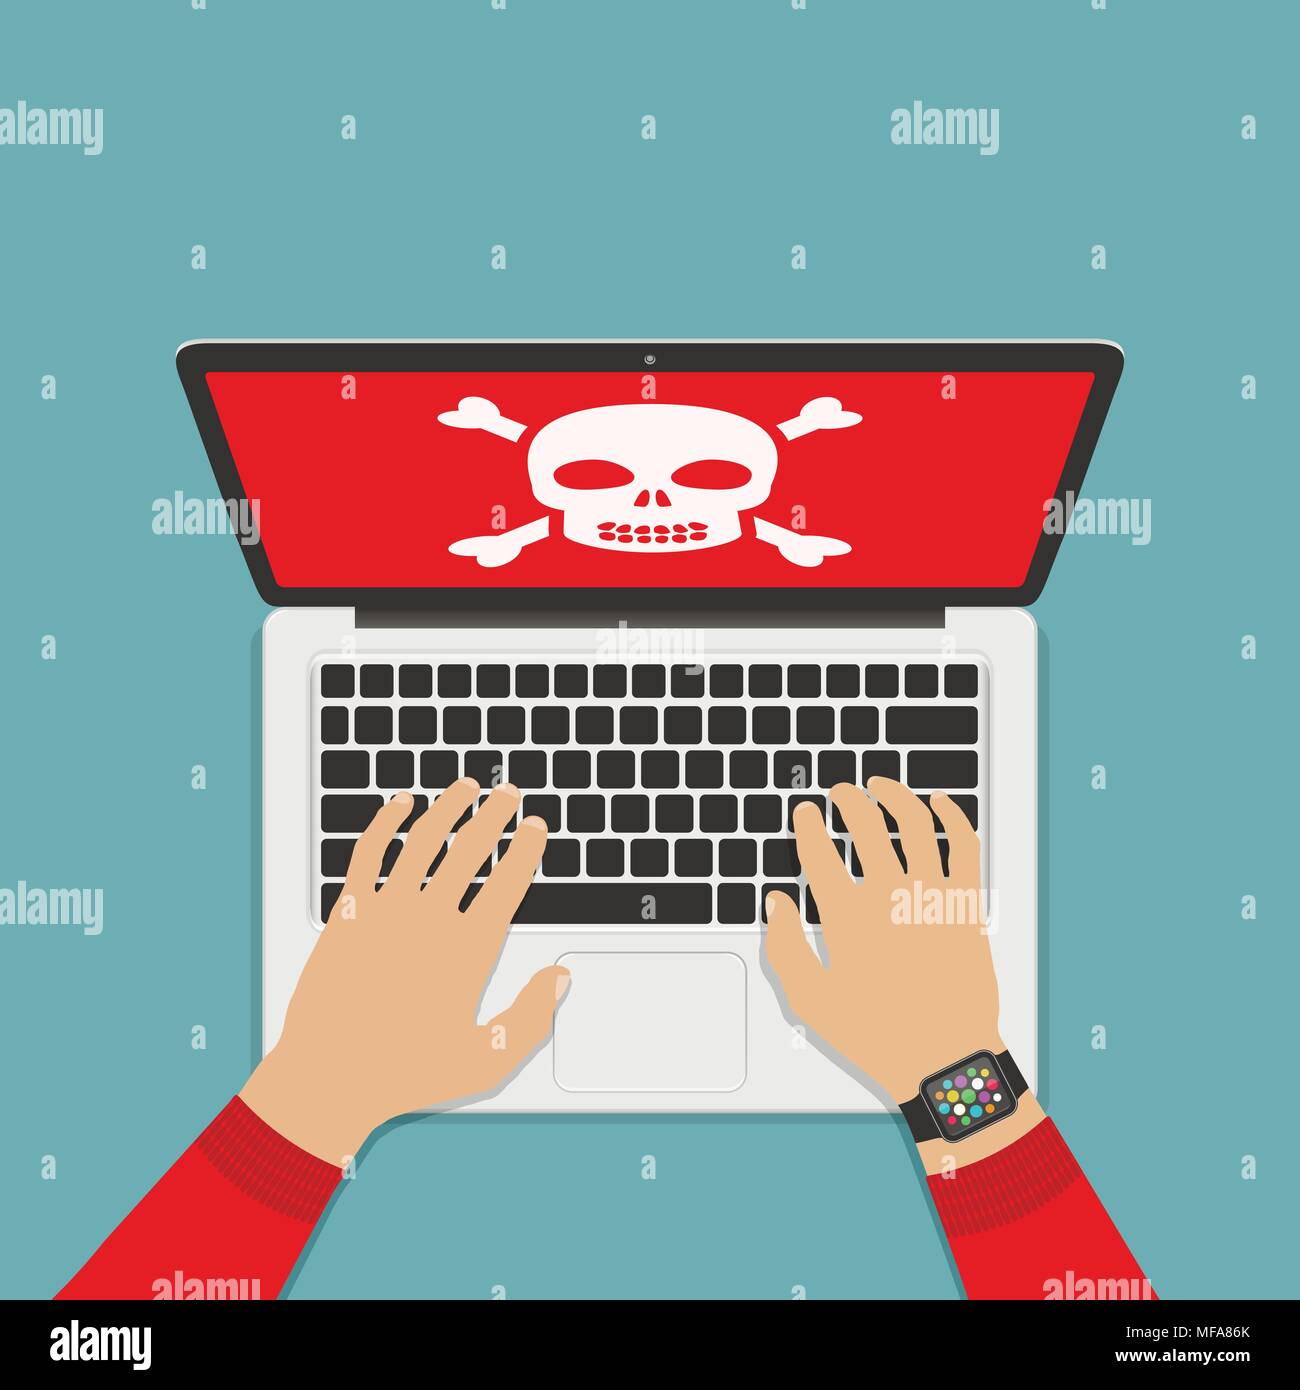 Concept of computer system error. Hands on laptop keyboard and scull on laptop red screen. Flat vector illustration. Stock Vector